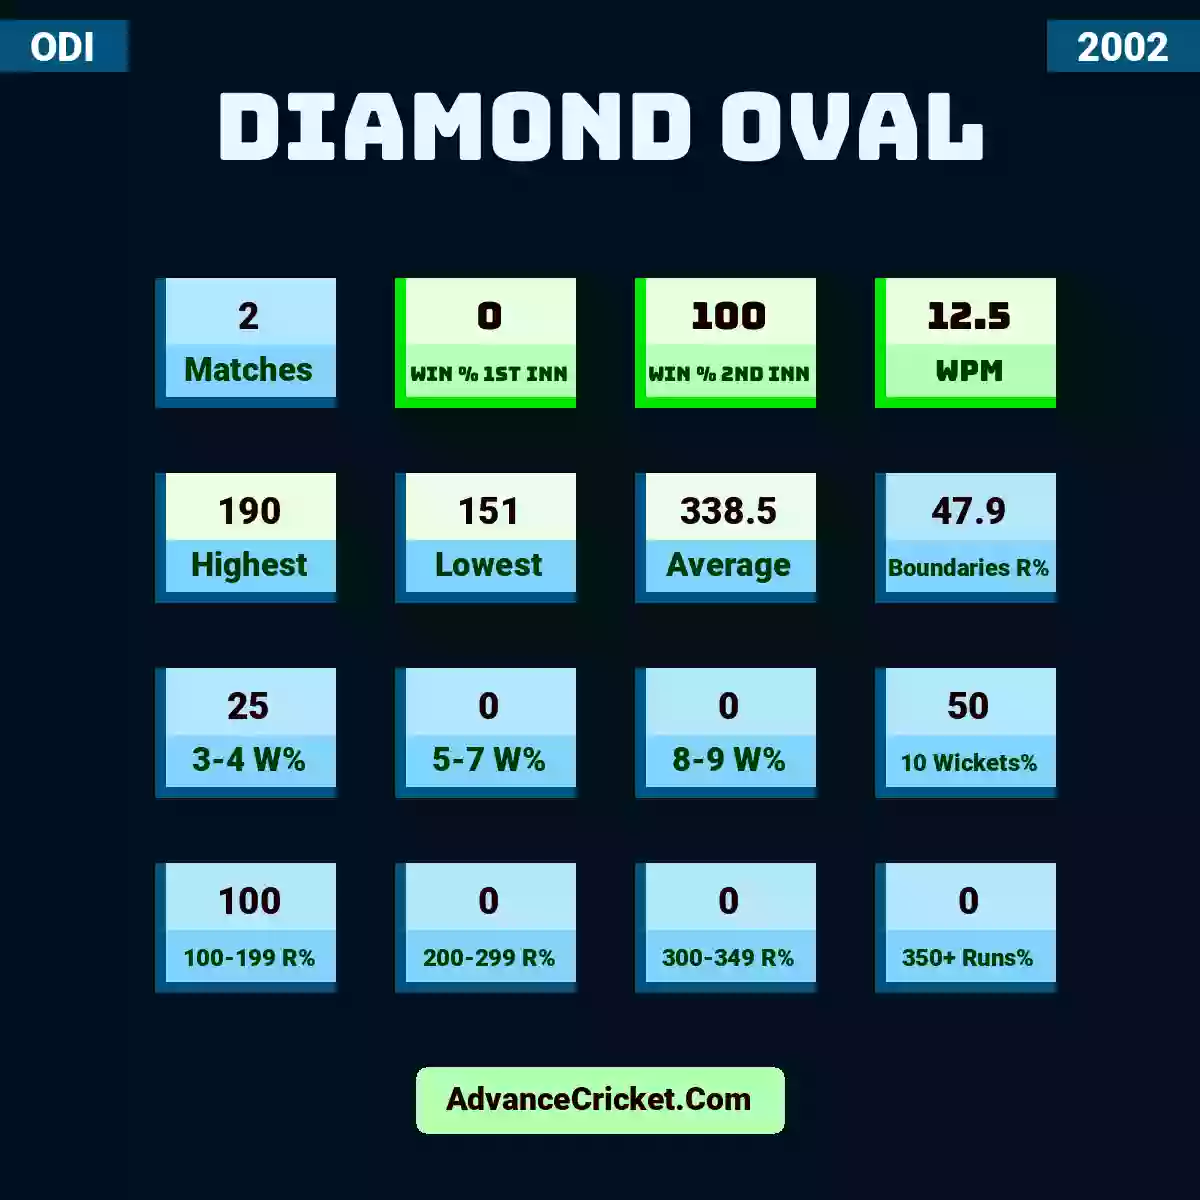 Image showing Diamond Oval with Matches: 2, Win % 1st Inn: 0, Win % 2nd Inn: 100, WPM: 12.5, Highest: 190, Lowest: 151, Average: 338.5, Boundaries R%: 47.9, 3-4 W%: 25, 5-7 W%: 0, 8-9 W%: 0, 10 Wickets%: 50, 100-199 R%: 100, 200-299 R%: 0, 300-349 R%: 0, 350+ Runs%: 0.